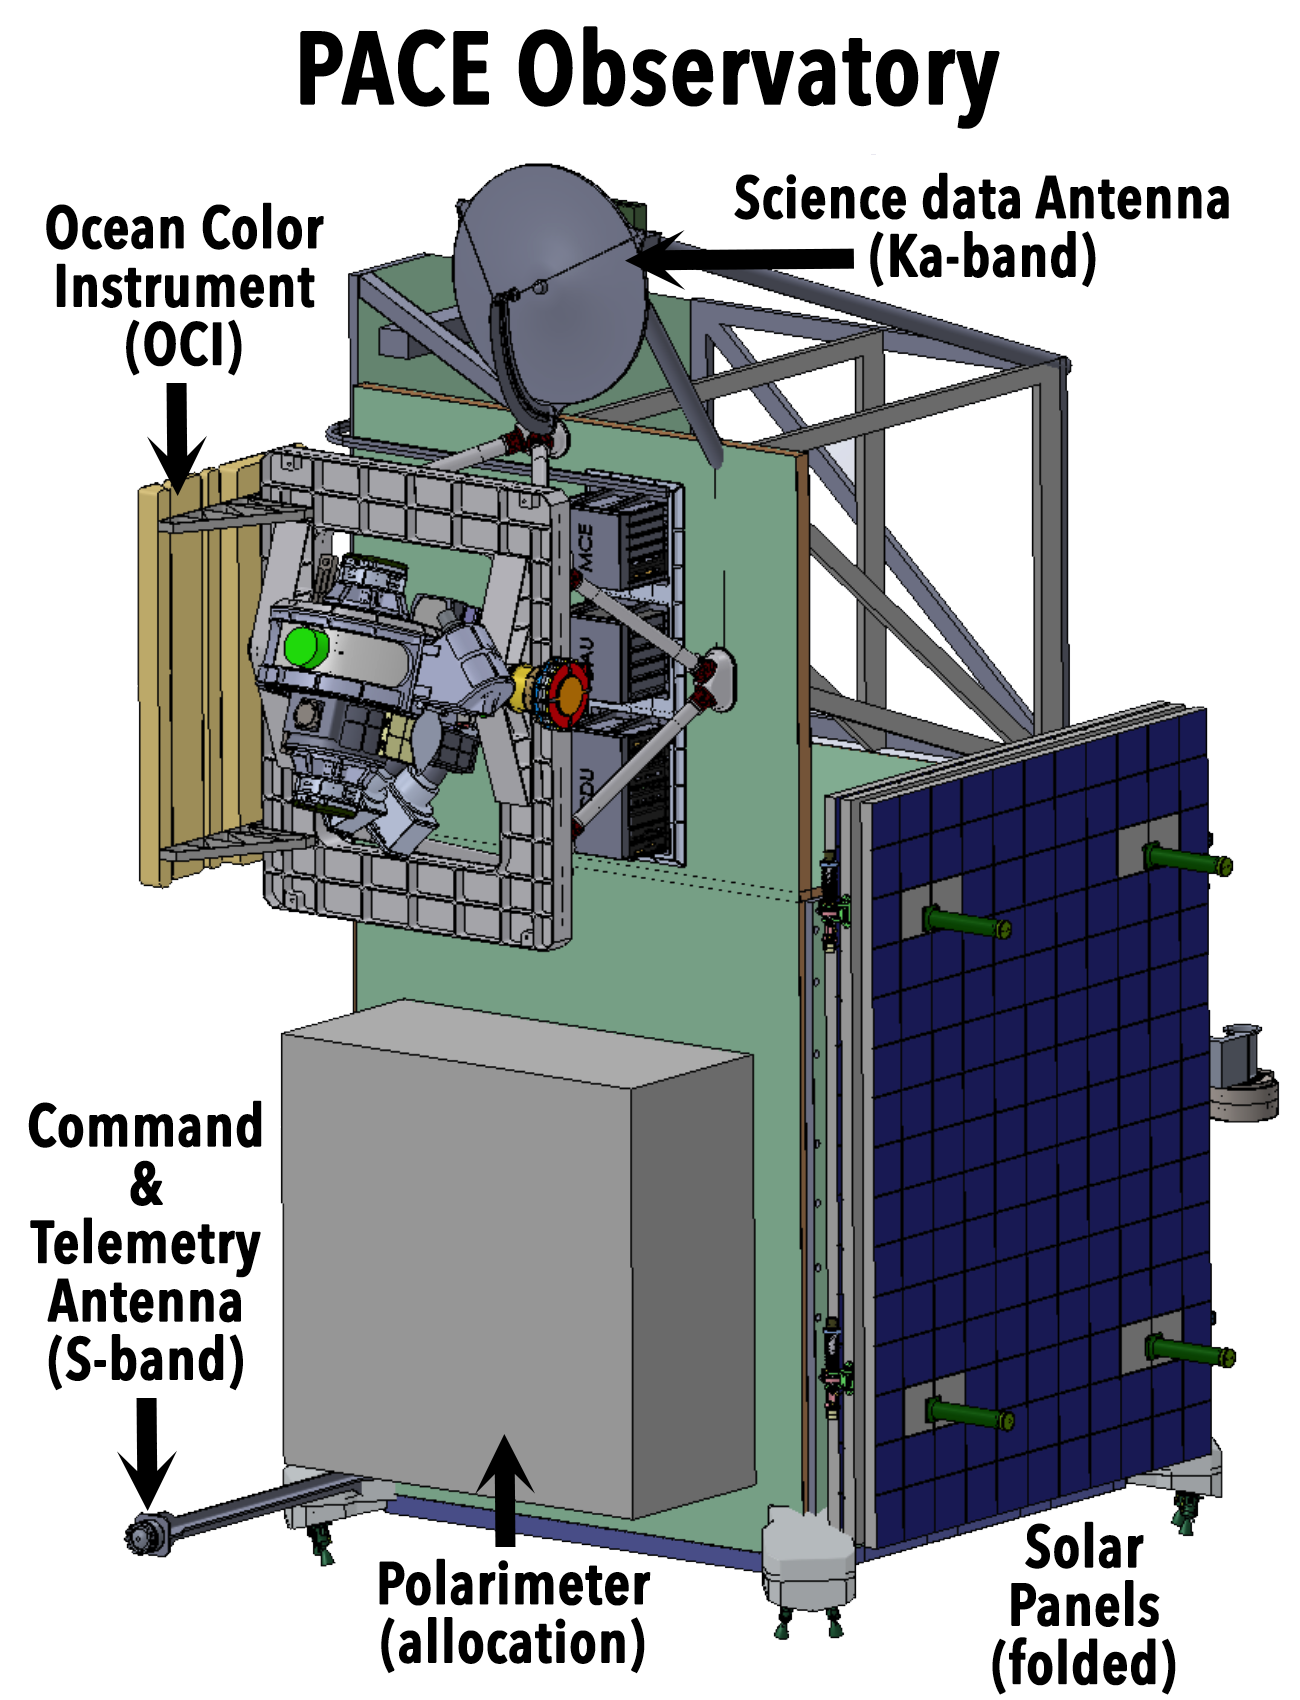 Illustration of the PACE observatory with solar panel (dark blue) deployed. In this perspective, the Ocean Color Instrument is located toward the bottom right. The S-band omni-directional command and telemetry antenna is pointing down (foreground).